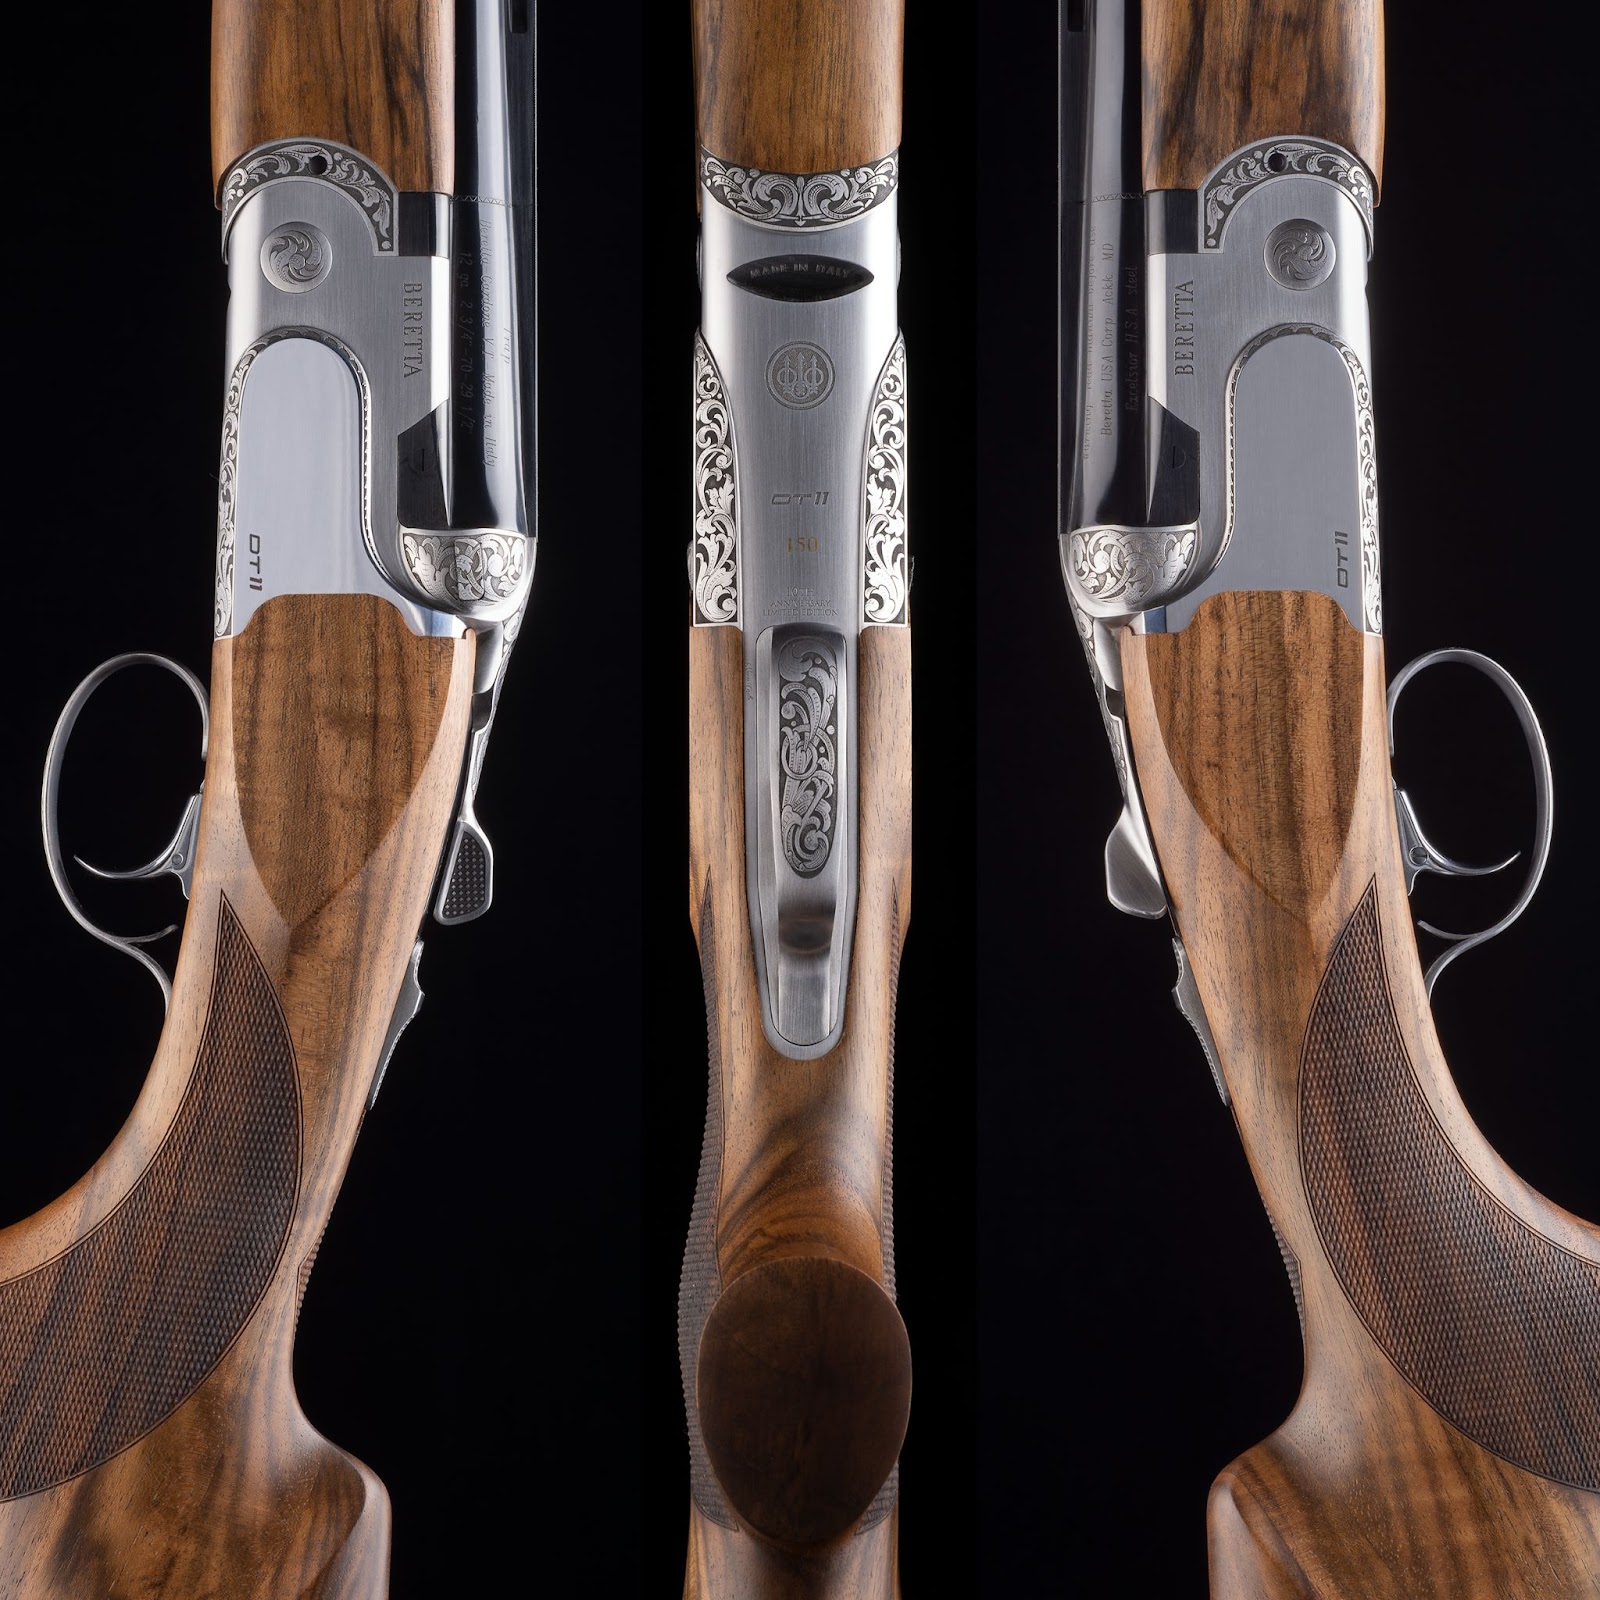 The Beretta DT11 engraving